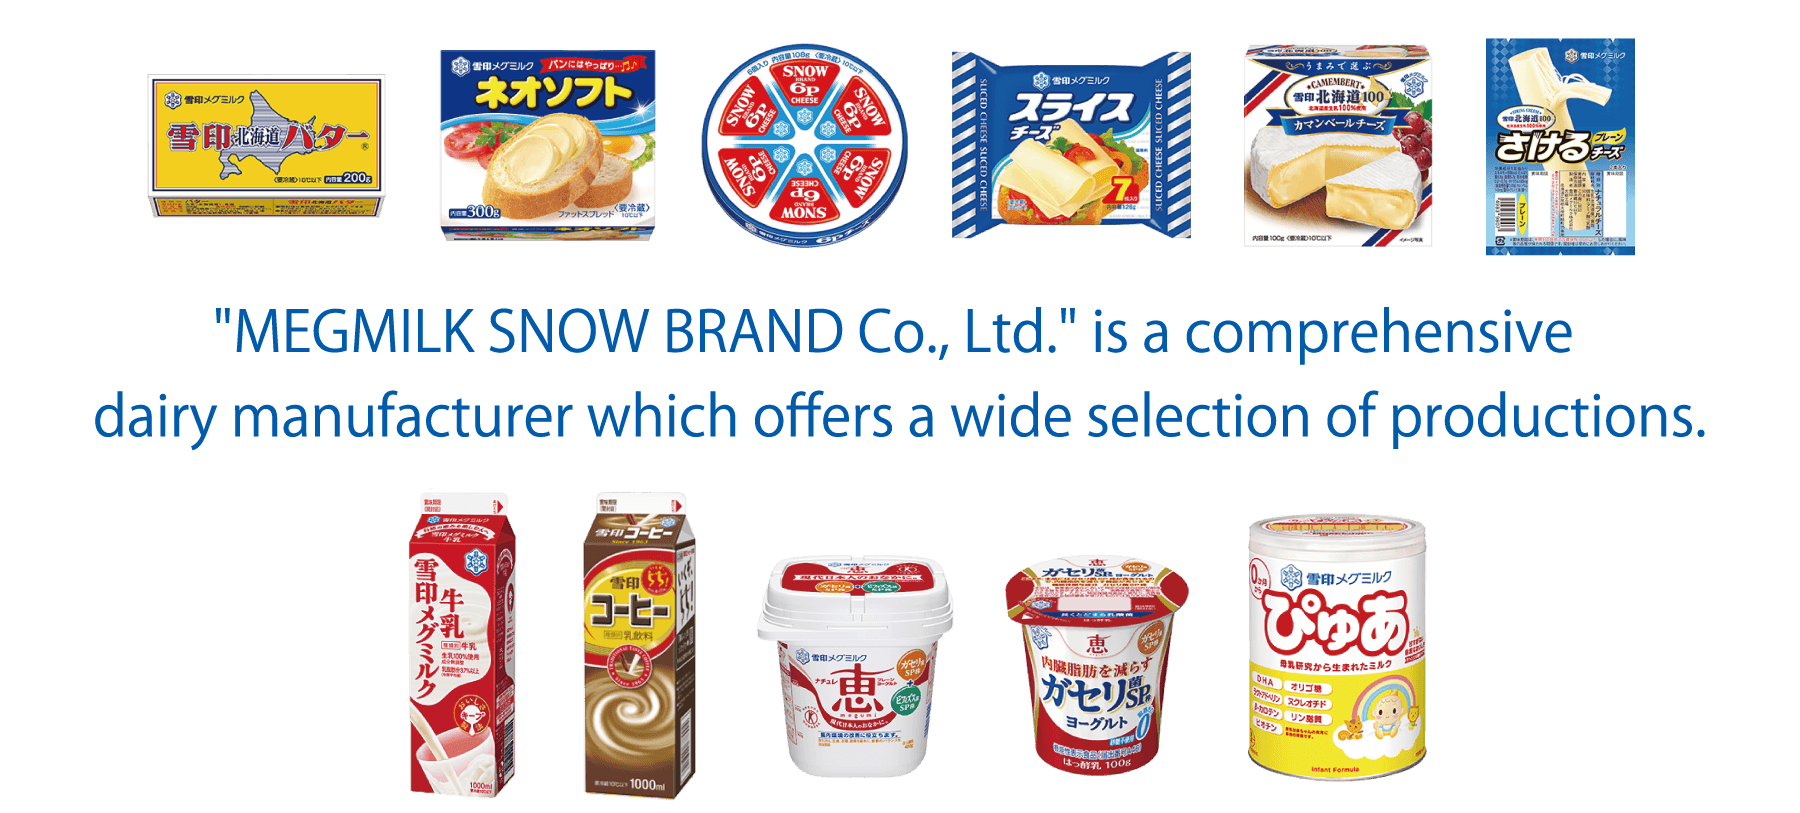 'MEGMILK SNOW BRAND Co., Ltd.' is a comprehensive dairy manufacturer which offers a wide selection of productions.